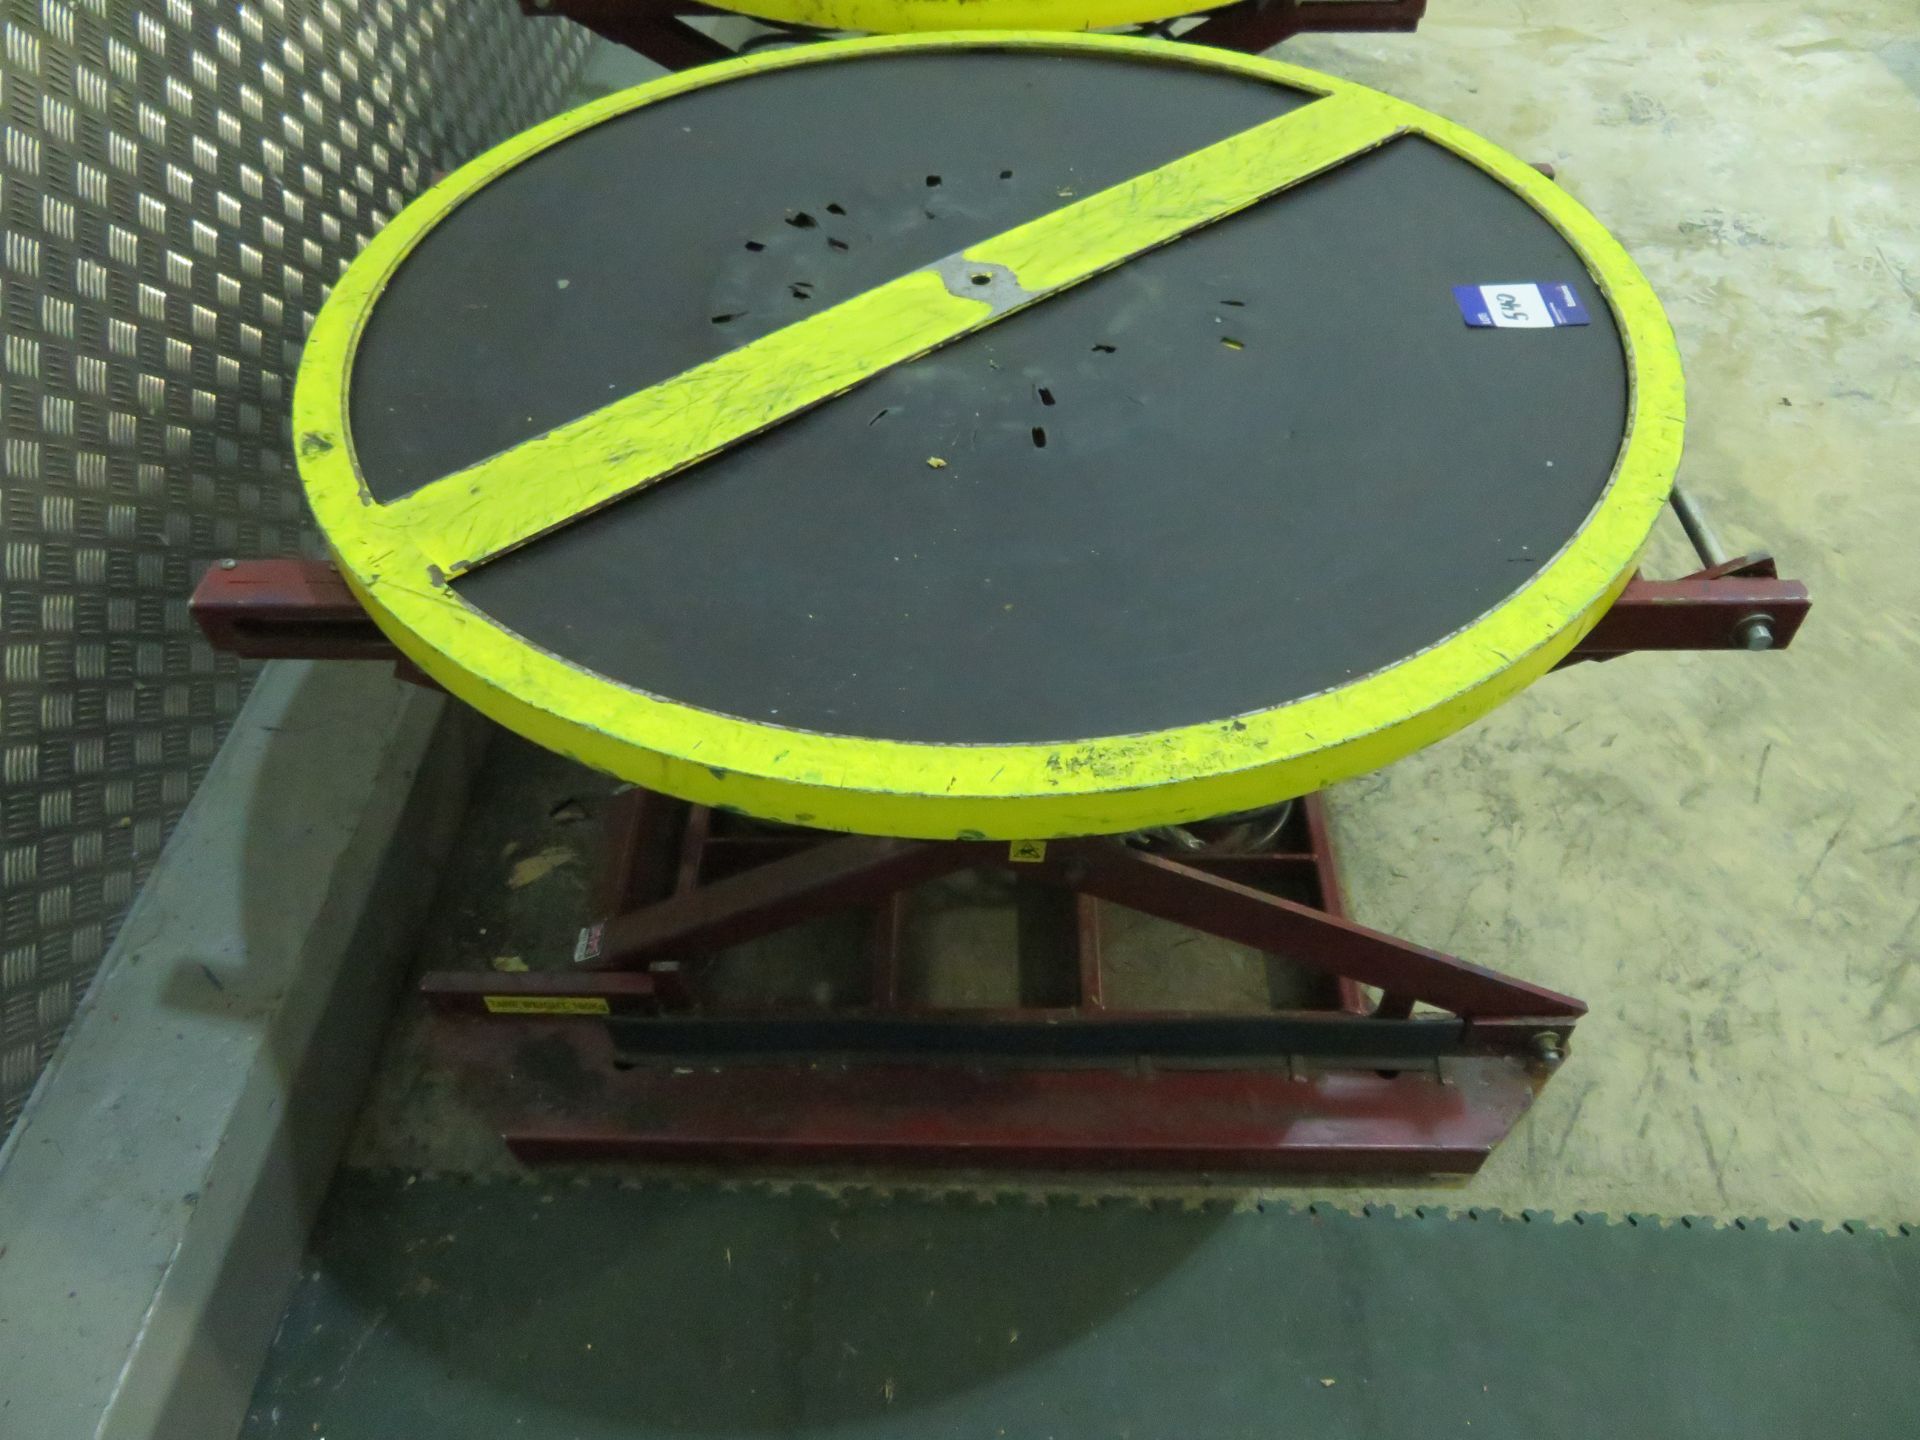 Spring loaded scissor lift with circular rotating pallet turn top - Image 3 of 4